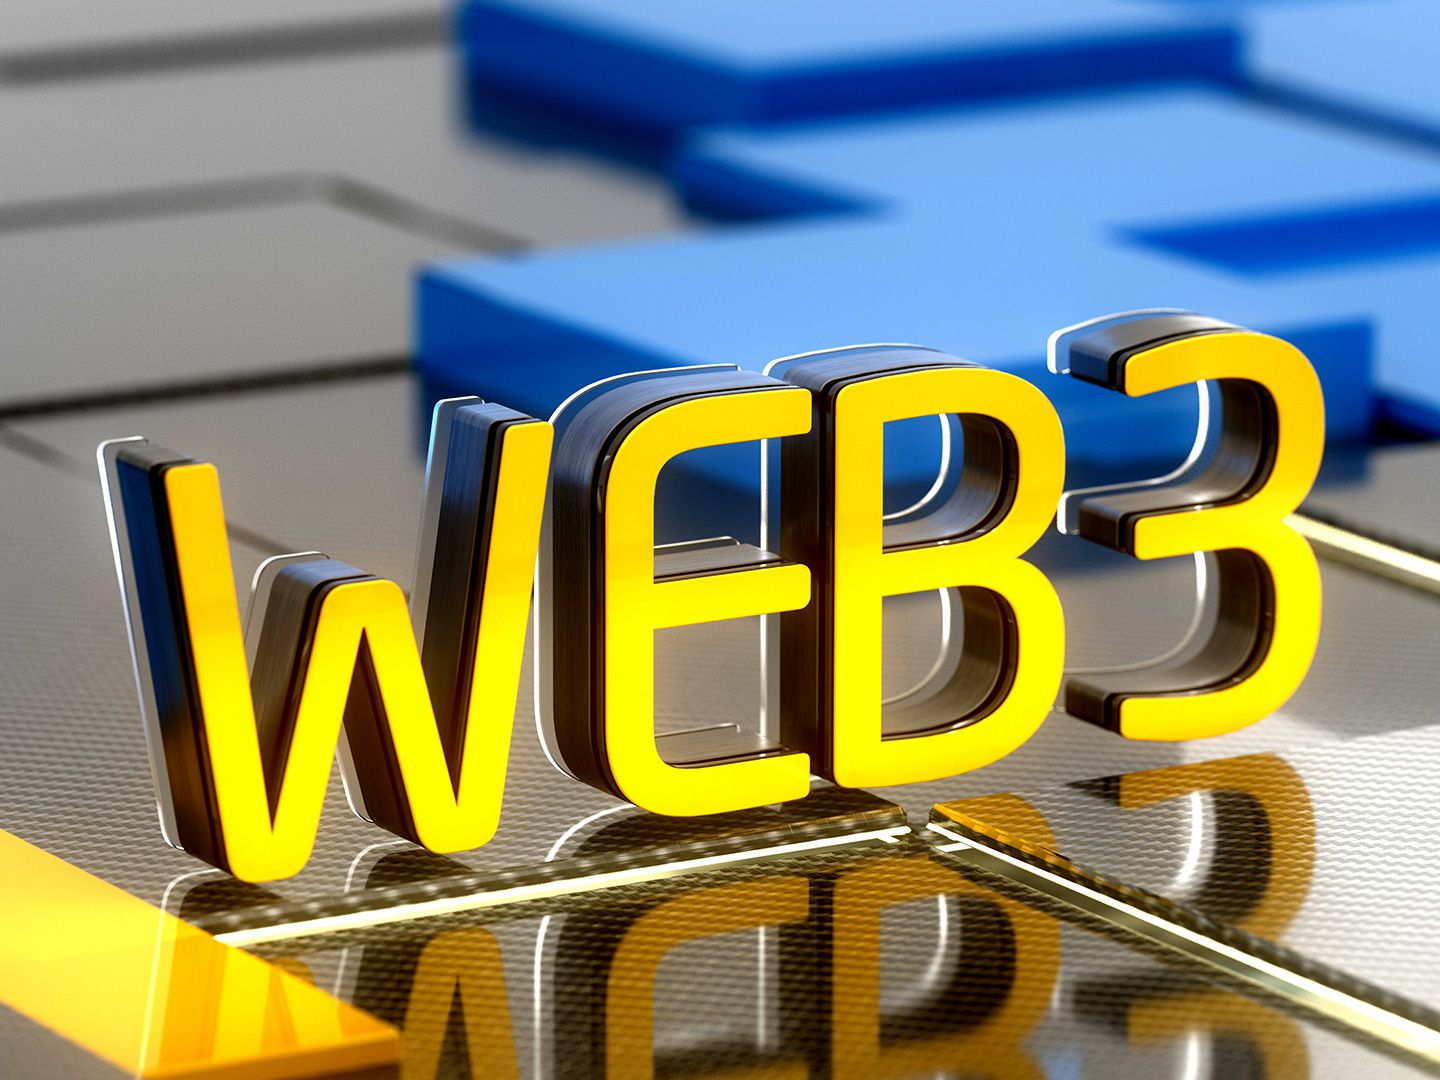 Web3 in Focus – Privacy, Power, and the Potential for Change